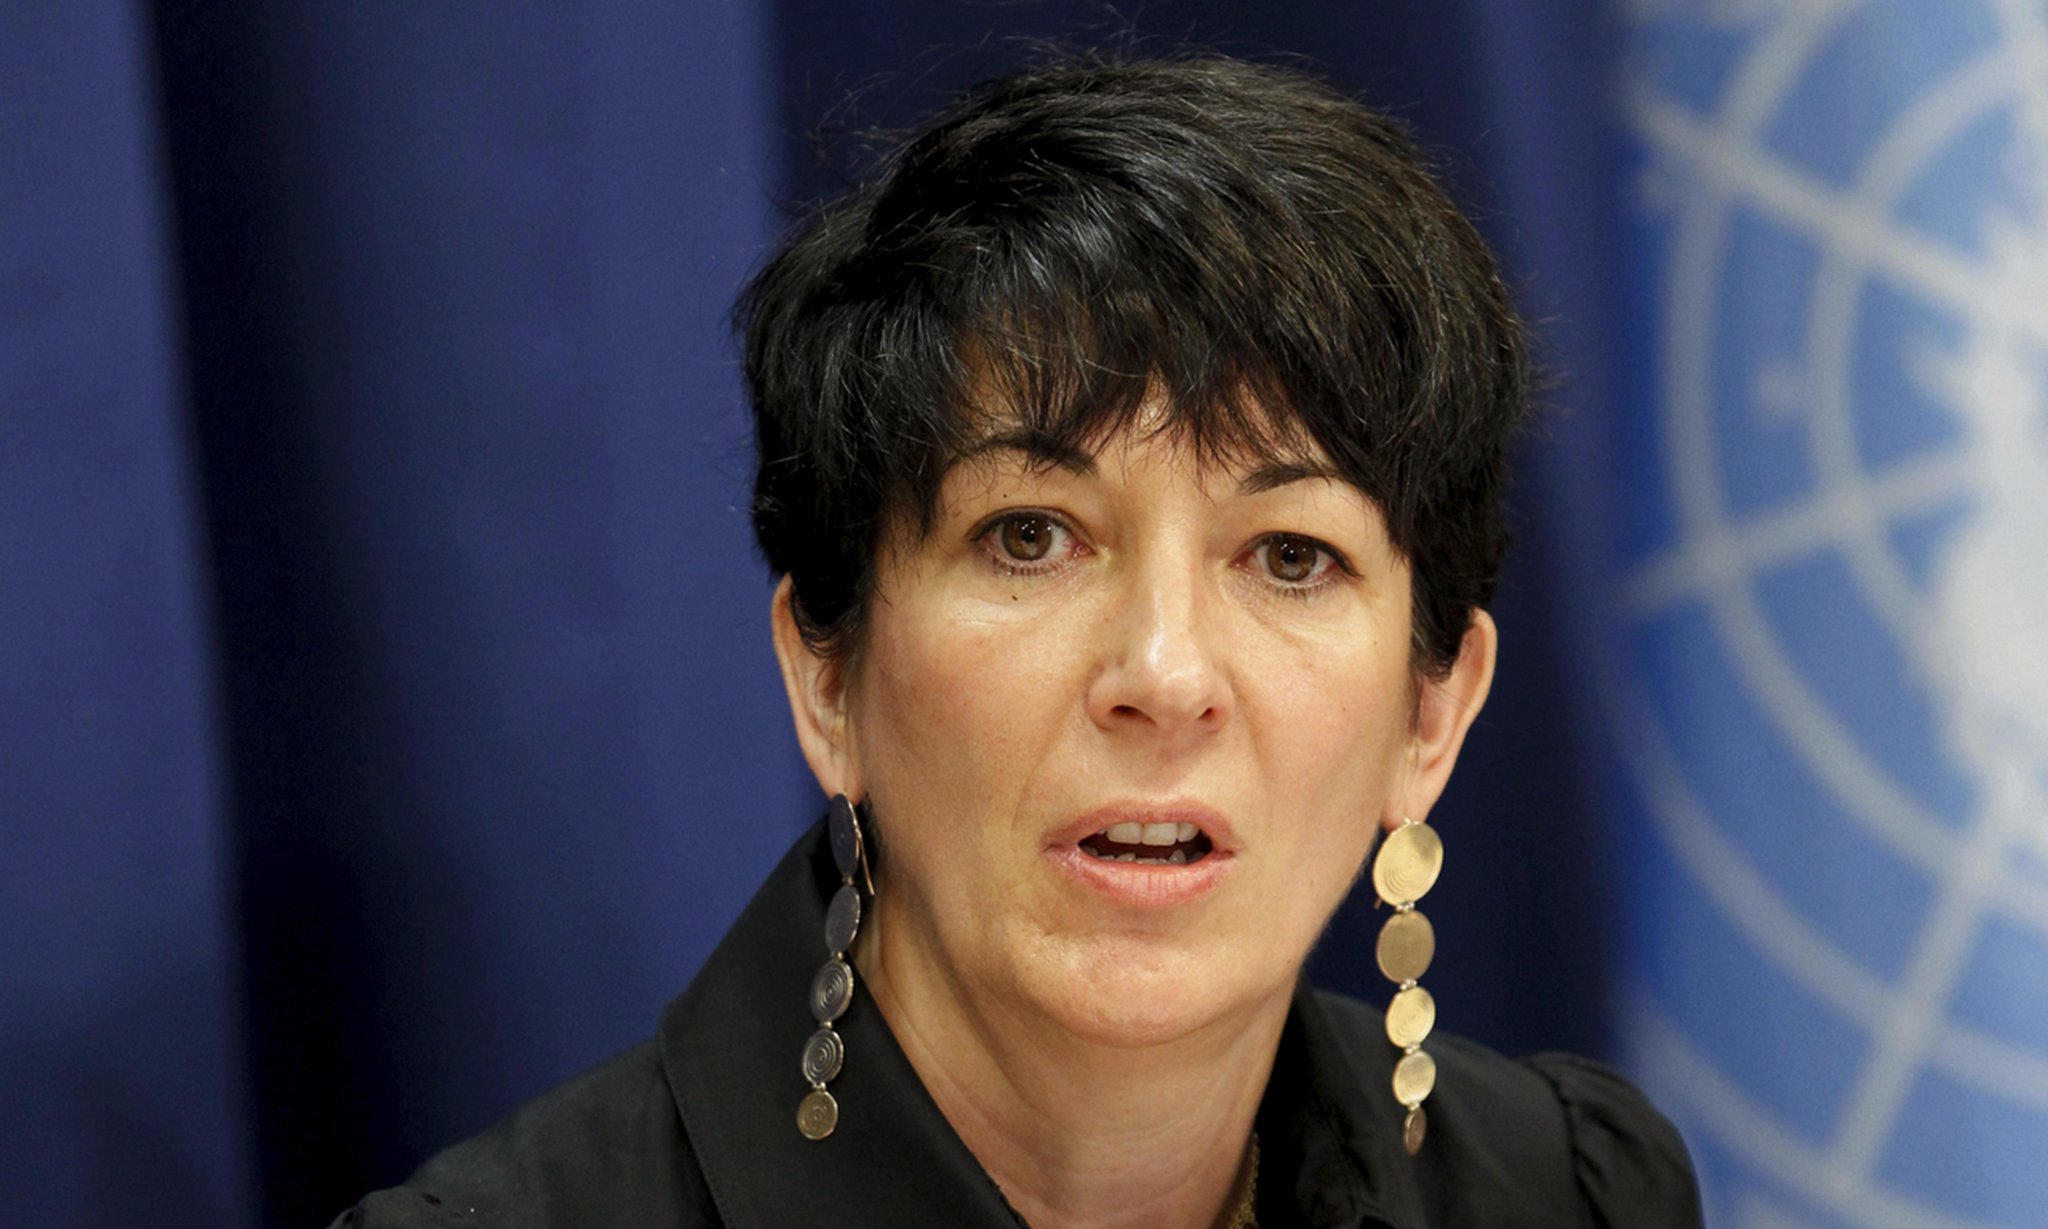 Ghislaine Maxwell sentenced to 20 years in prison for sex trafficking crimes